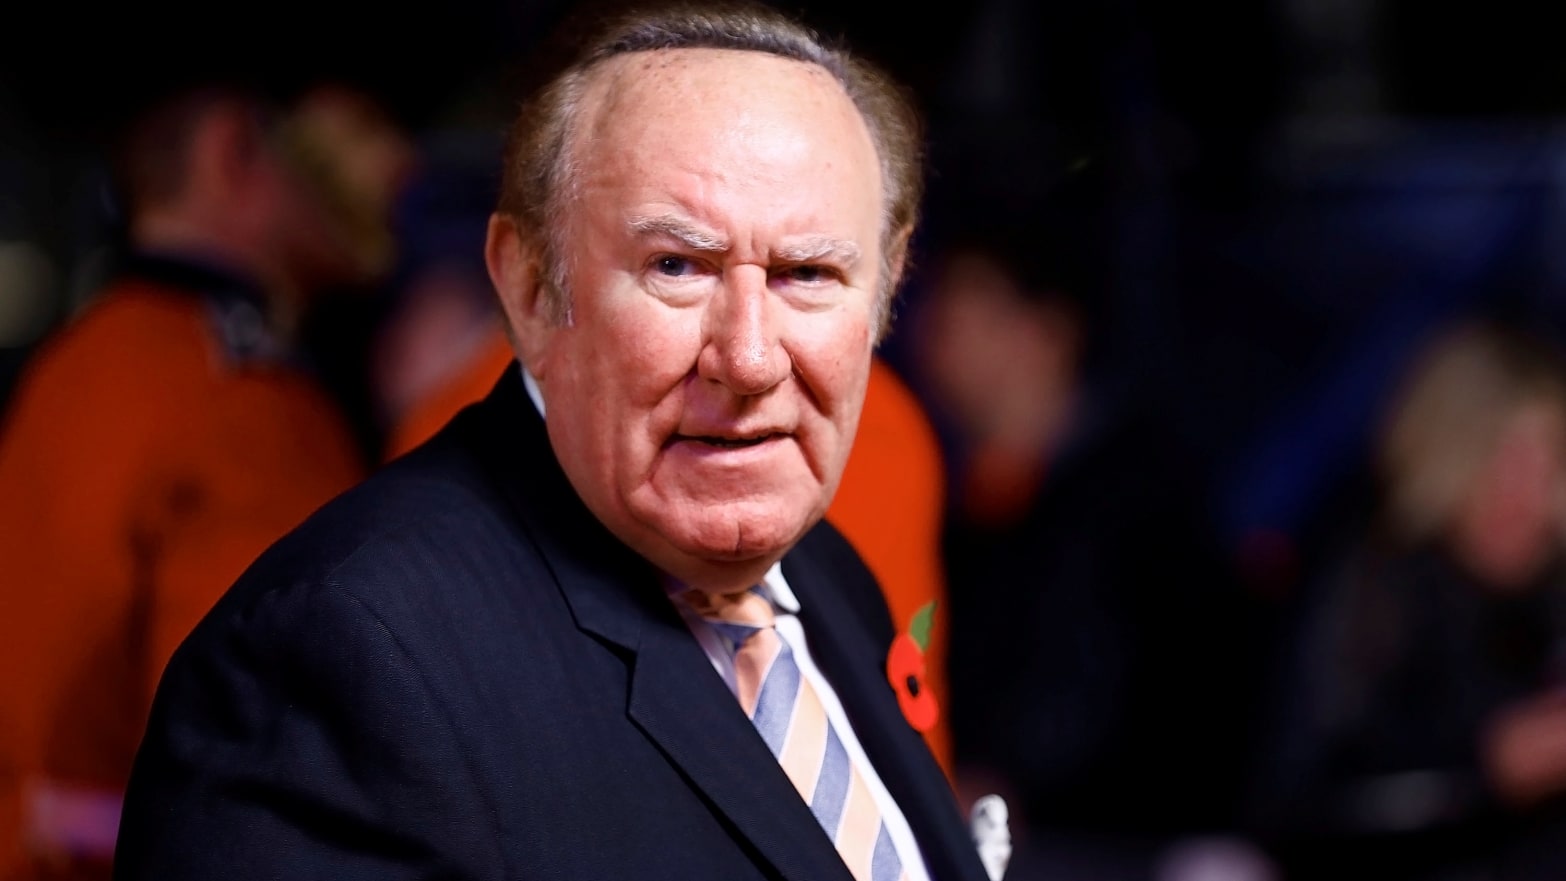 Image: Former Sunday Times editor Andrew Neil 